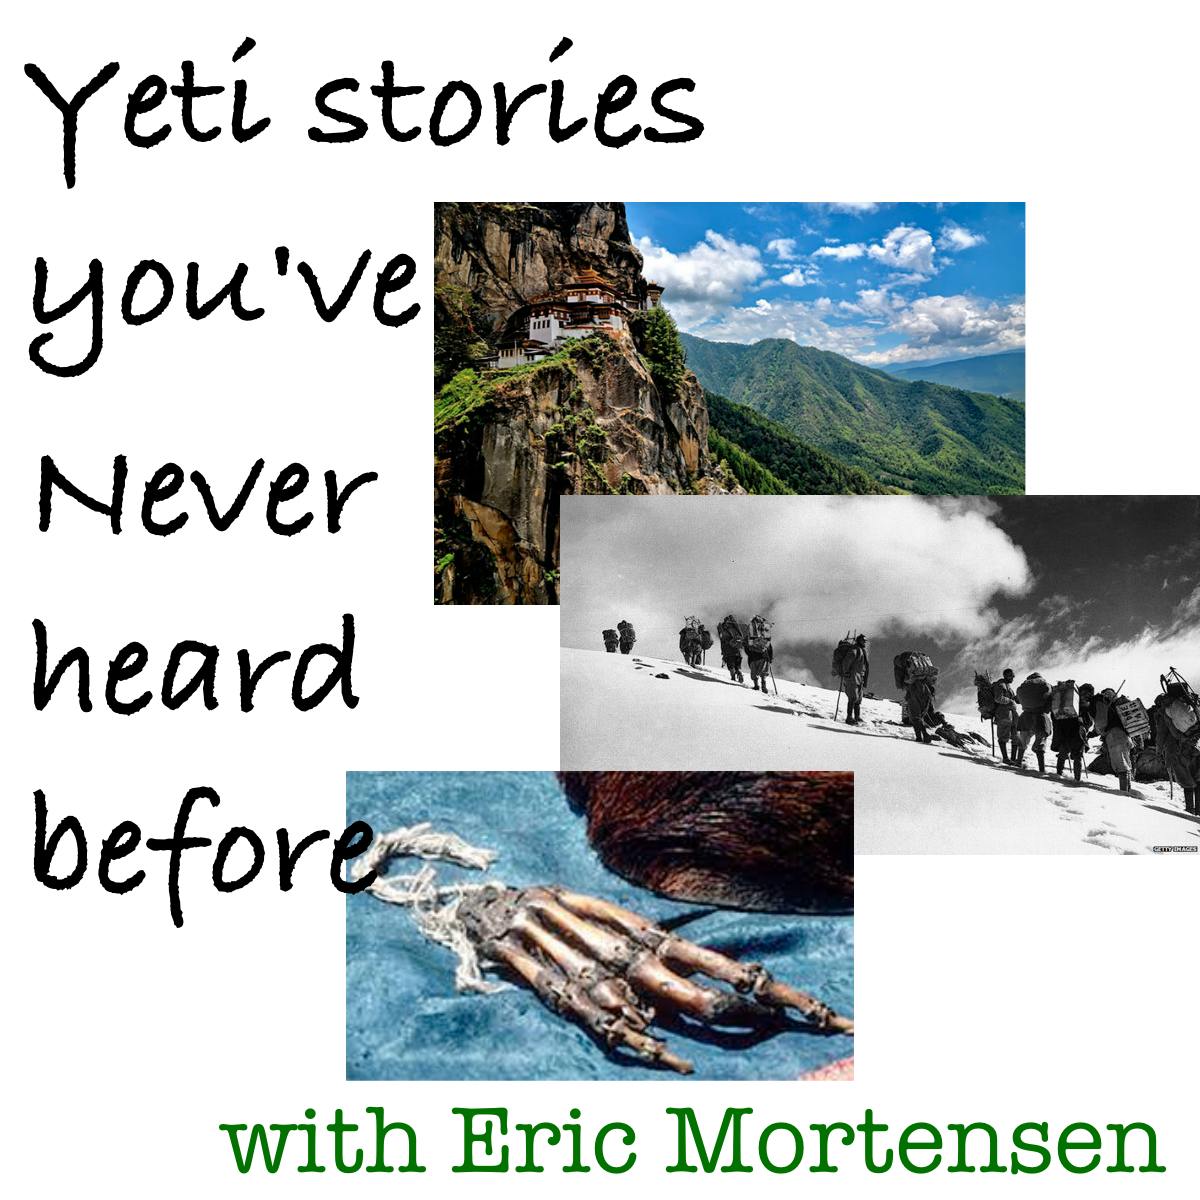 253 - Yeti Stories You've Never Heard Before - with Eric Mortensen